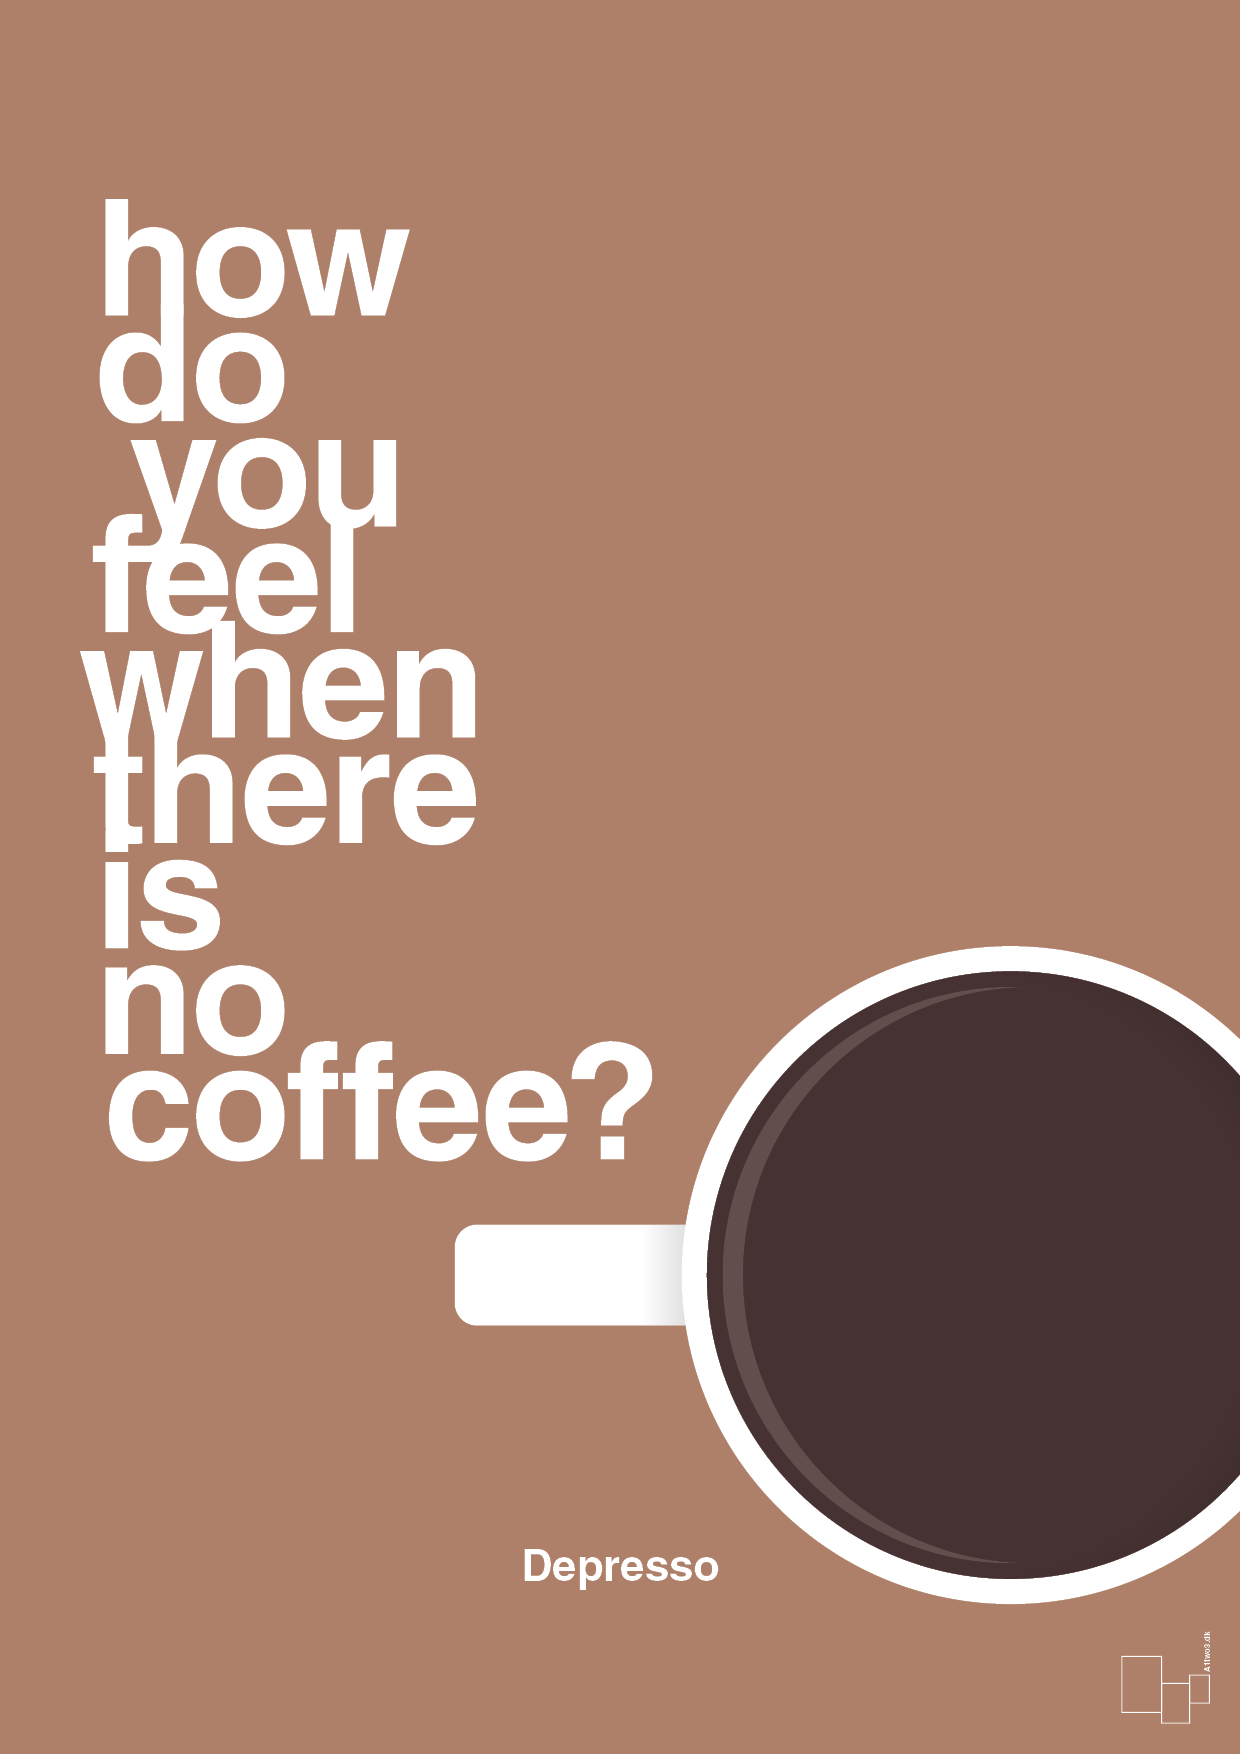 how do you feel when there is no coffee? depresso - Plakat med Mad & Drikke i Cider Spice